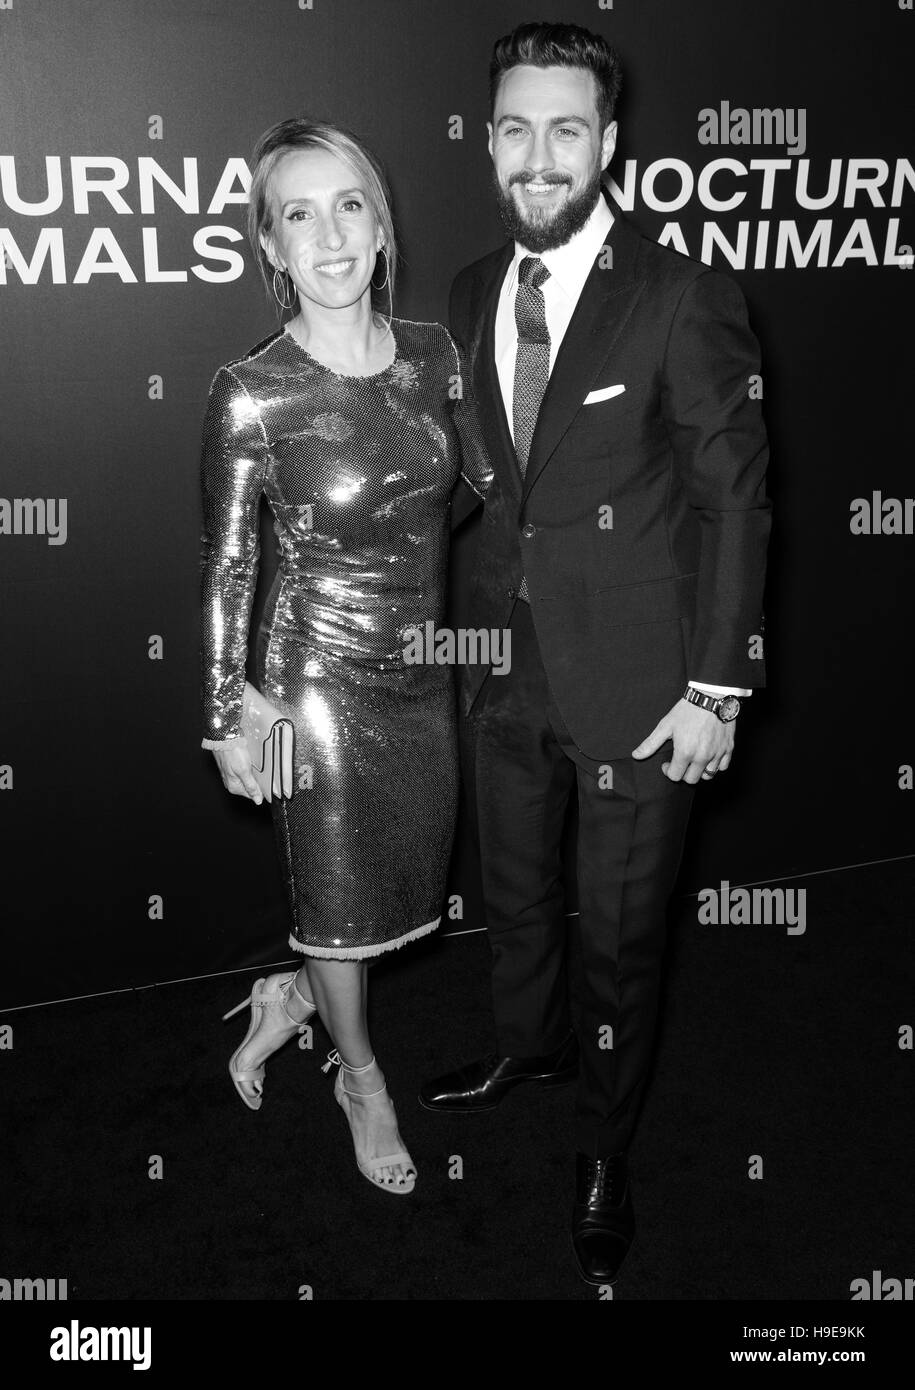 New York City, USA - November 17, 2016: Sam Taylor-Johnson (L) and actor Aaron Taylor-Johnson attend the 'Nocturnal Animals' New York premiere held at Stock Photo